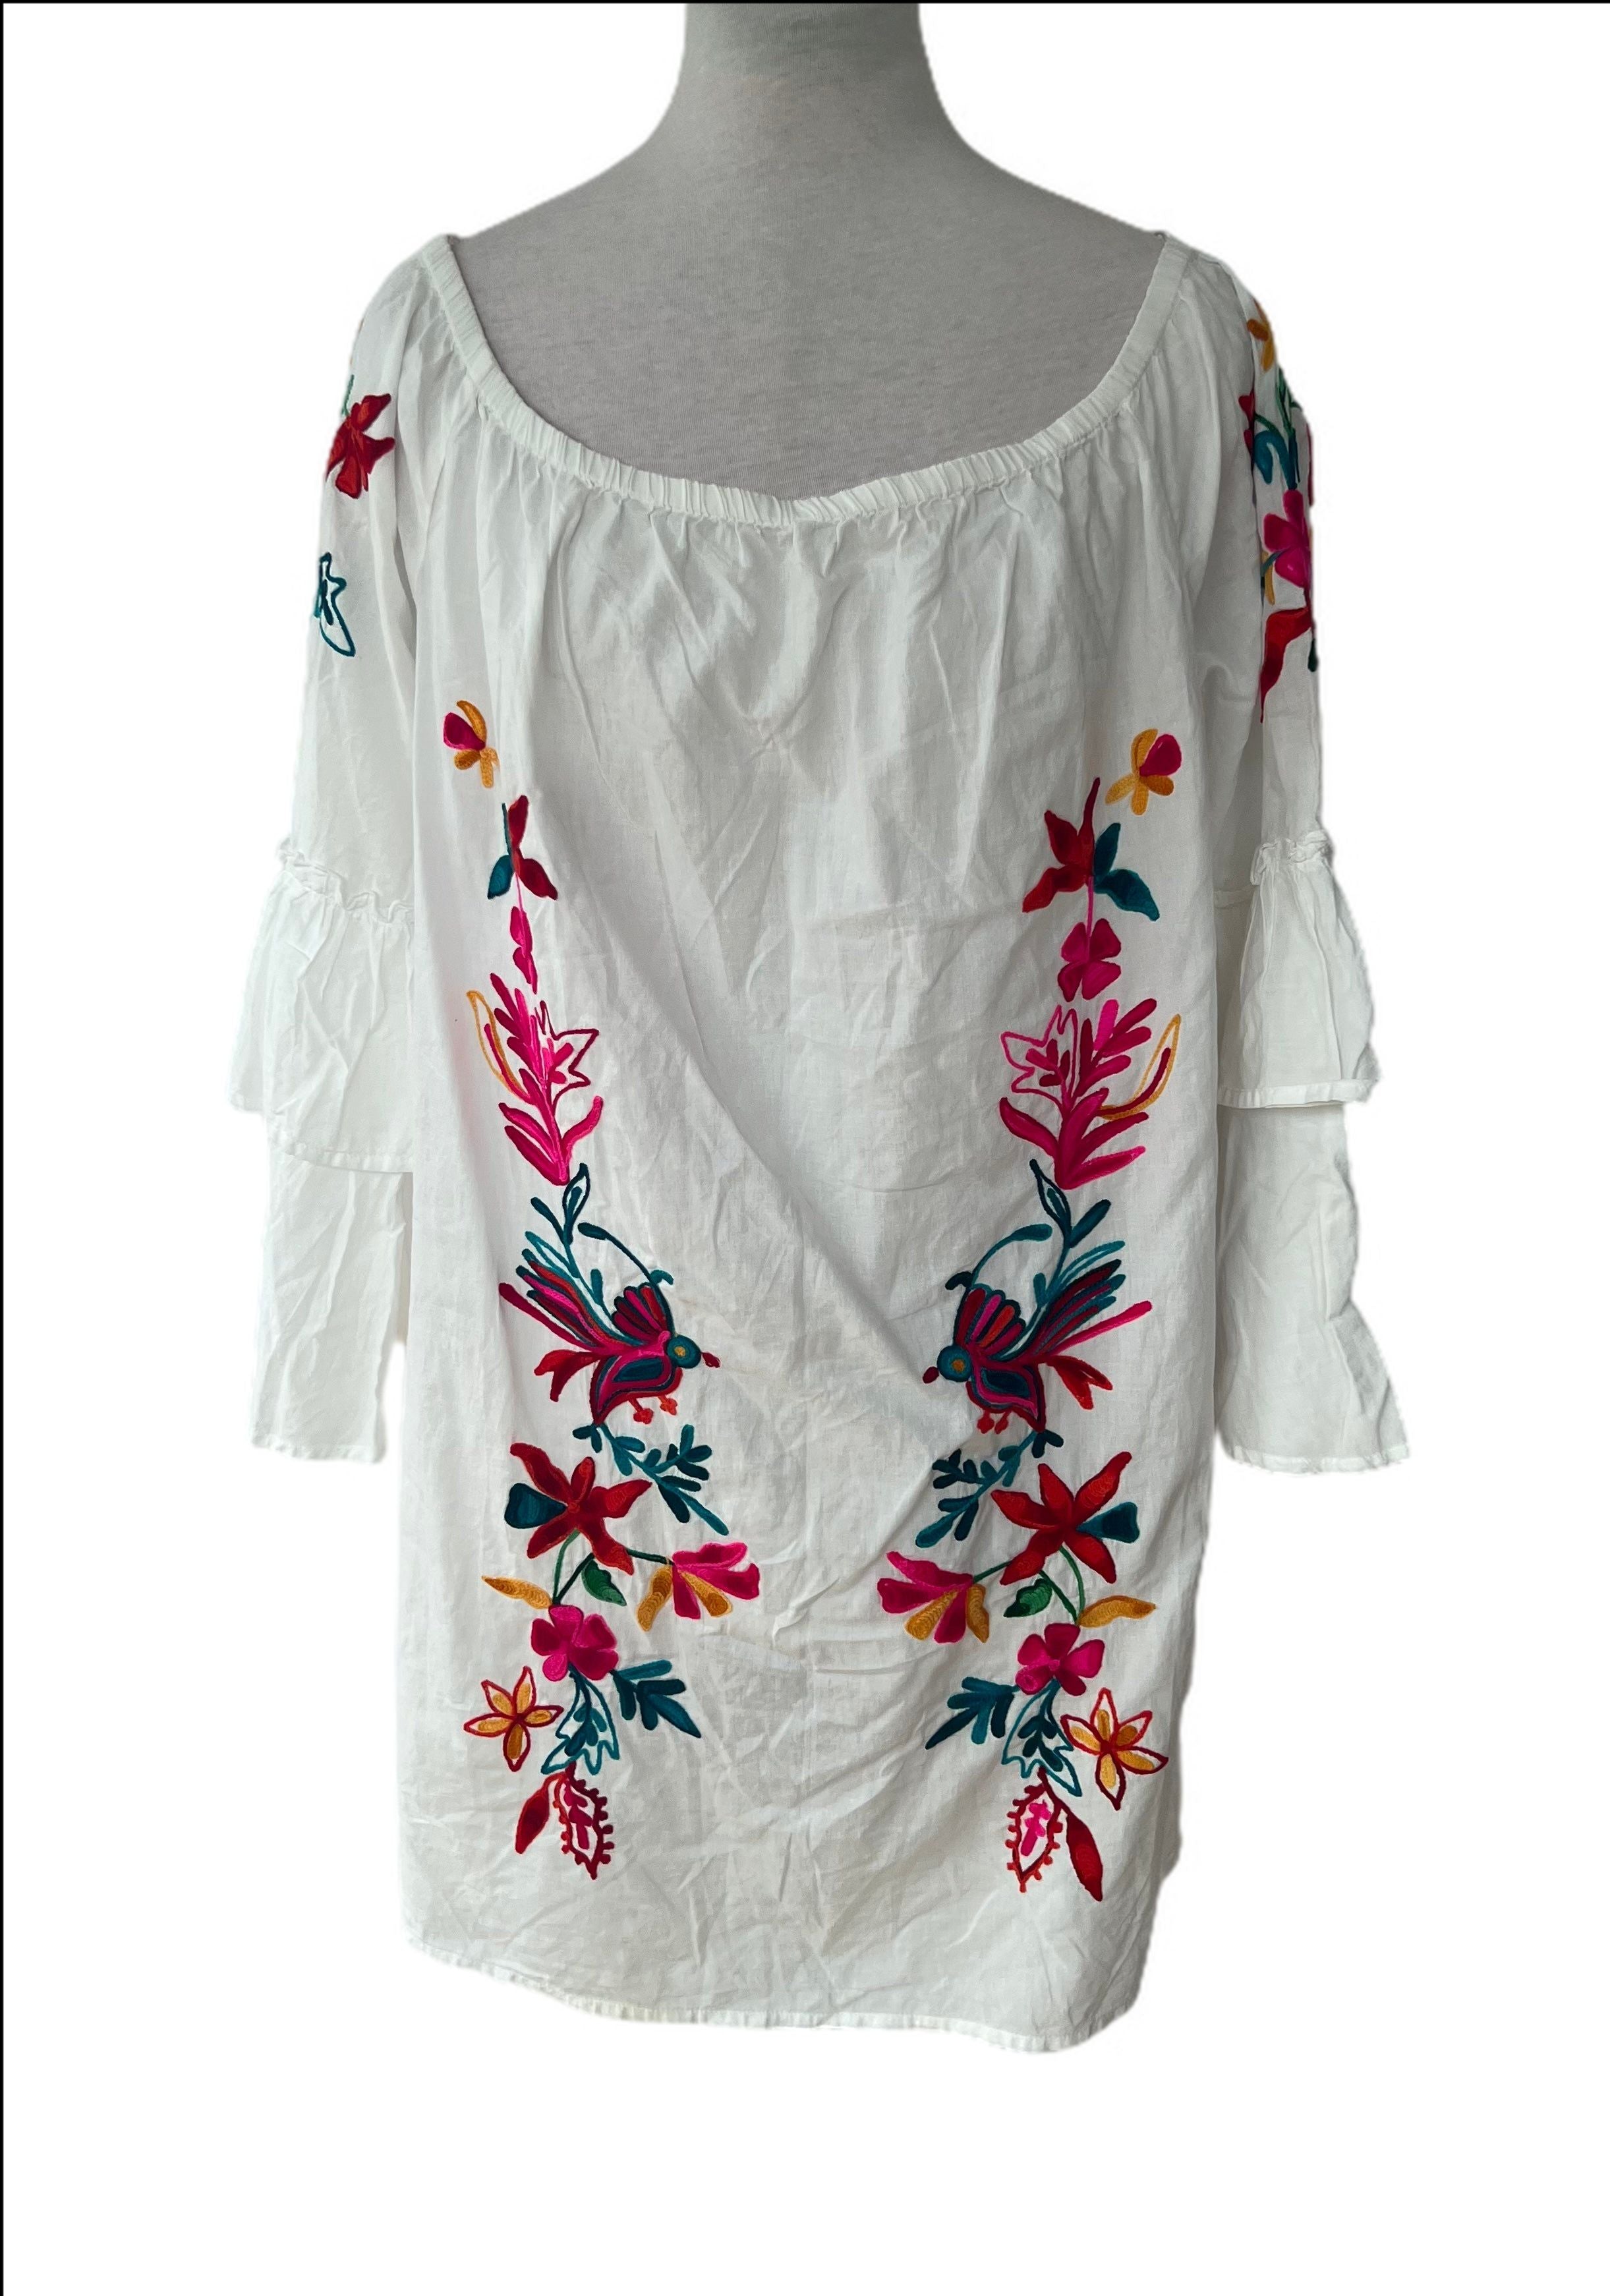 Off the shoulder embroidered top